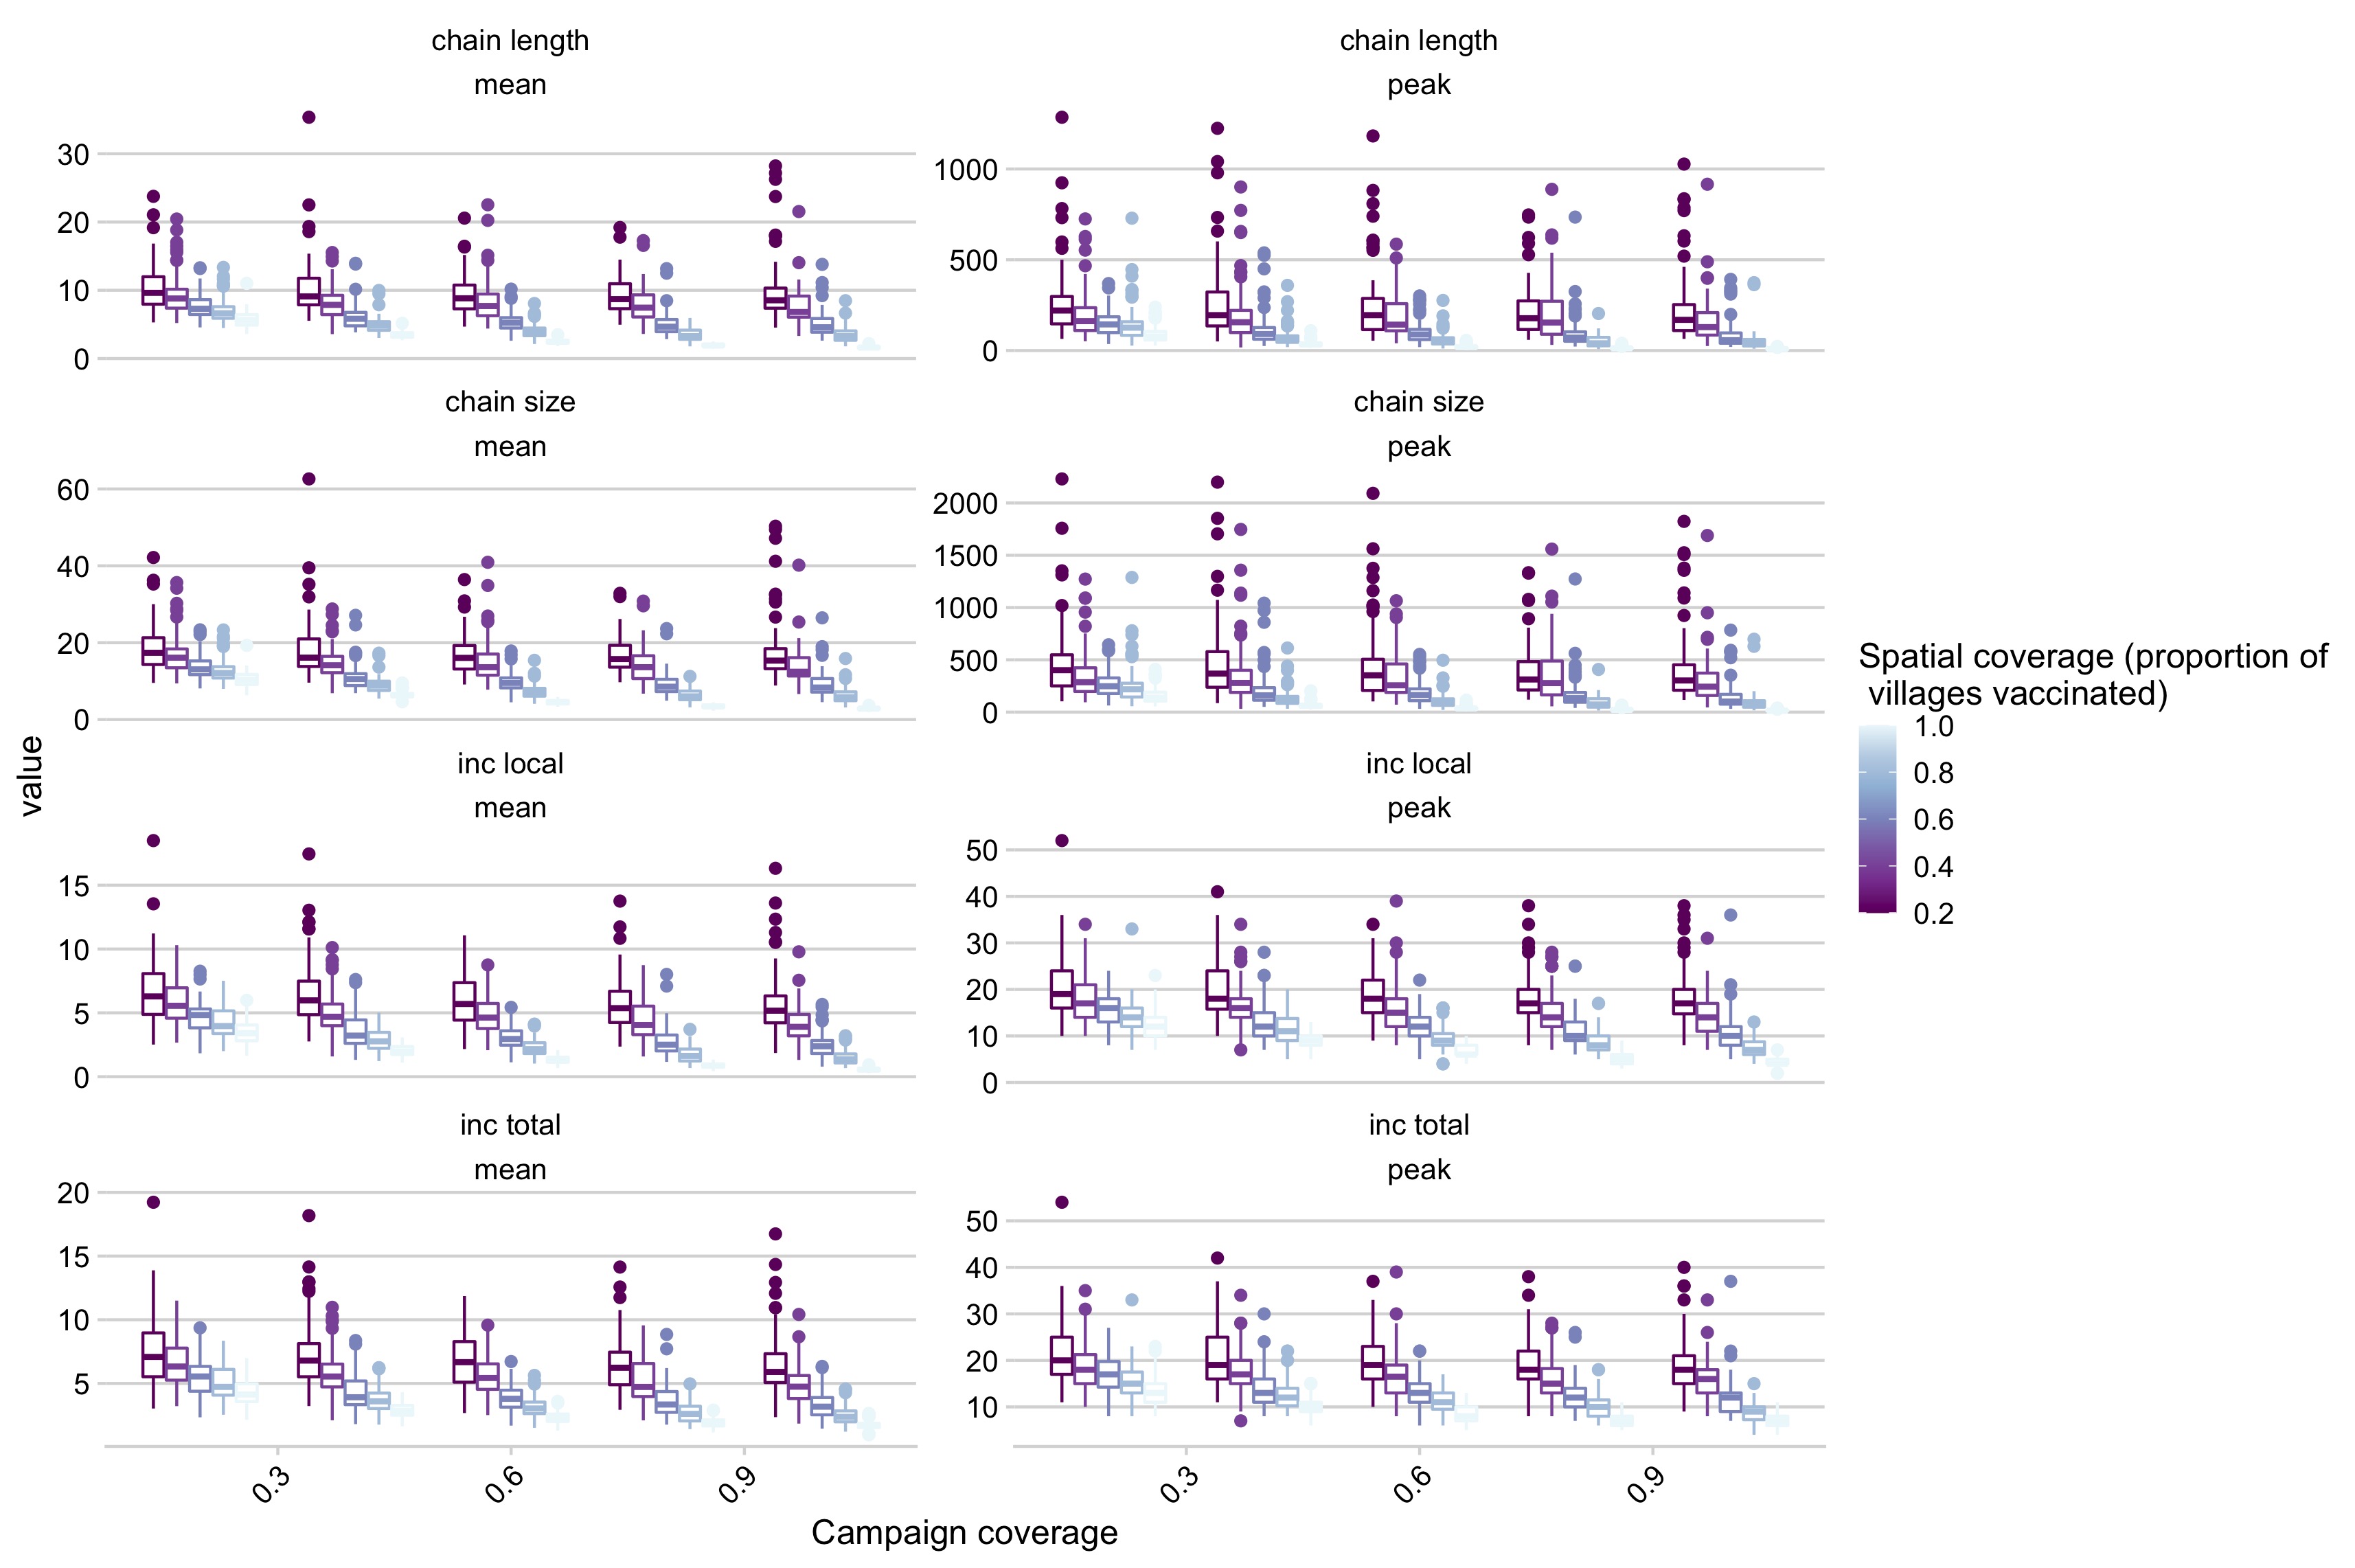 Simulation outcomes across a range of campaign coverage and spatial coverage for the baseline case where panels are different summary statistics of the simulations (i.e. chain length mean, chain length peak, etc.).